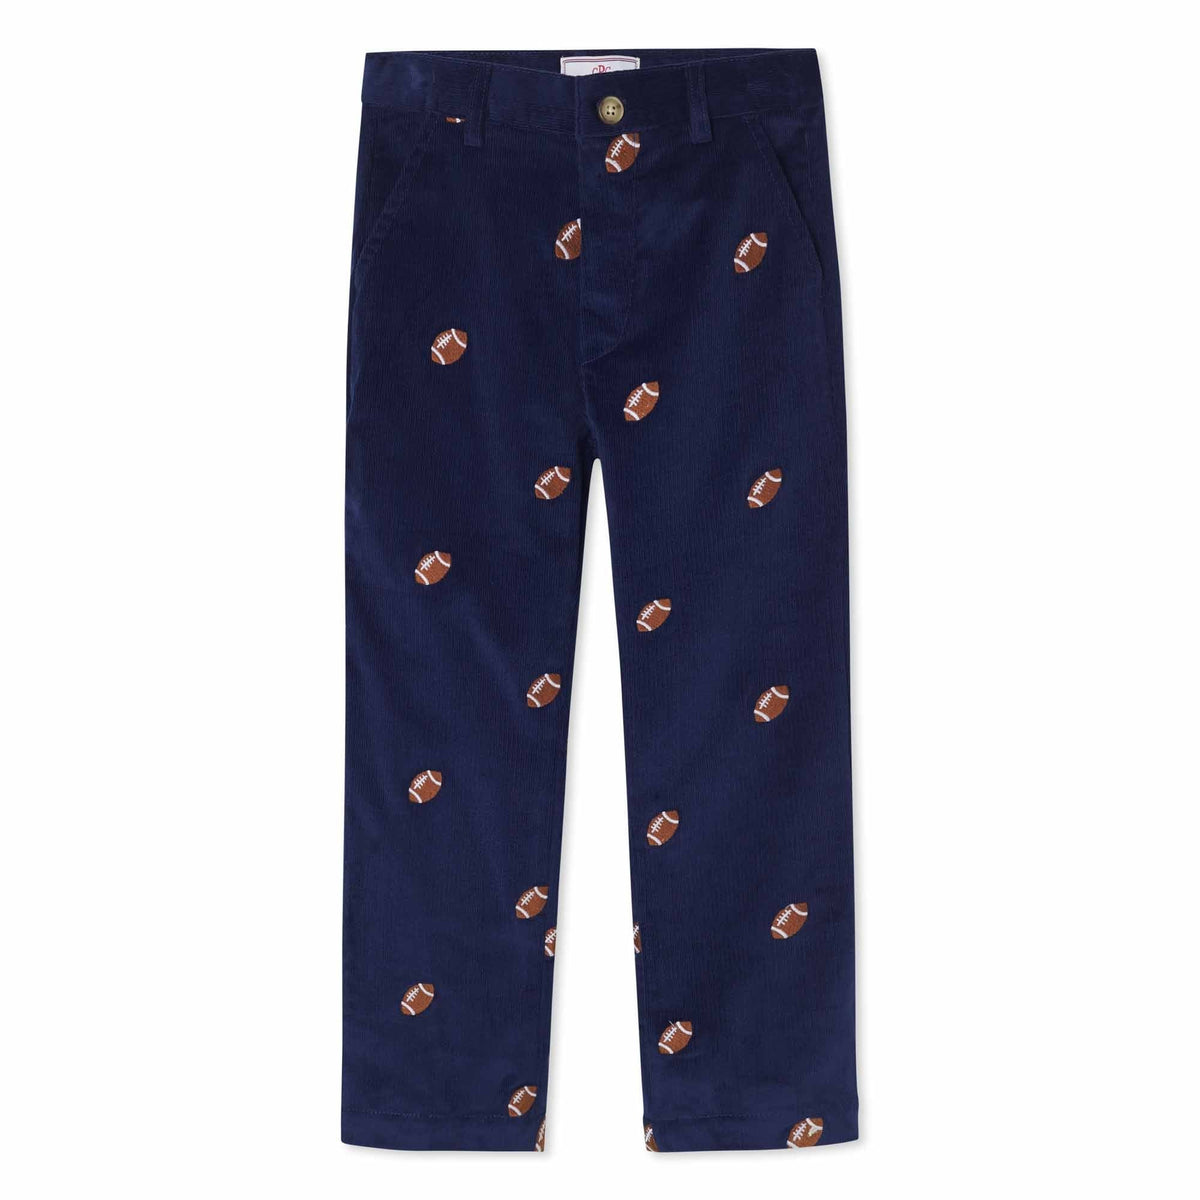 Classic and Preppy Gavin Pant, Medieval Blue Cord with Footballs-Bottoms-Medieval Blue W/ Footballs-5Y-CPC - Classic Prep Childrenswear